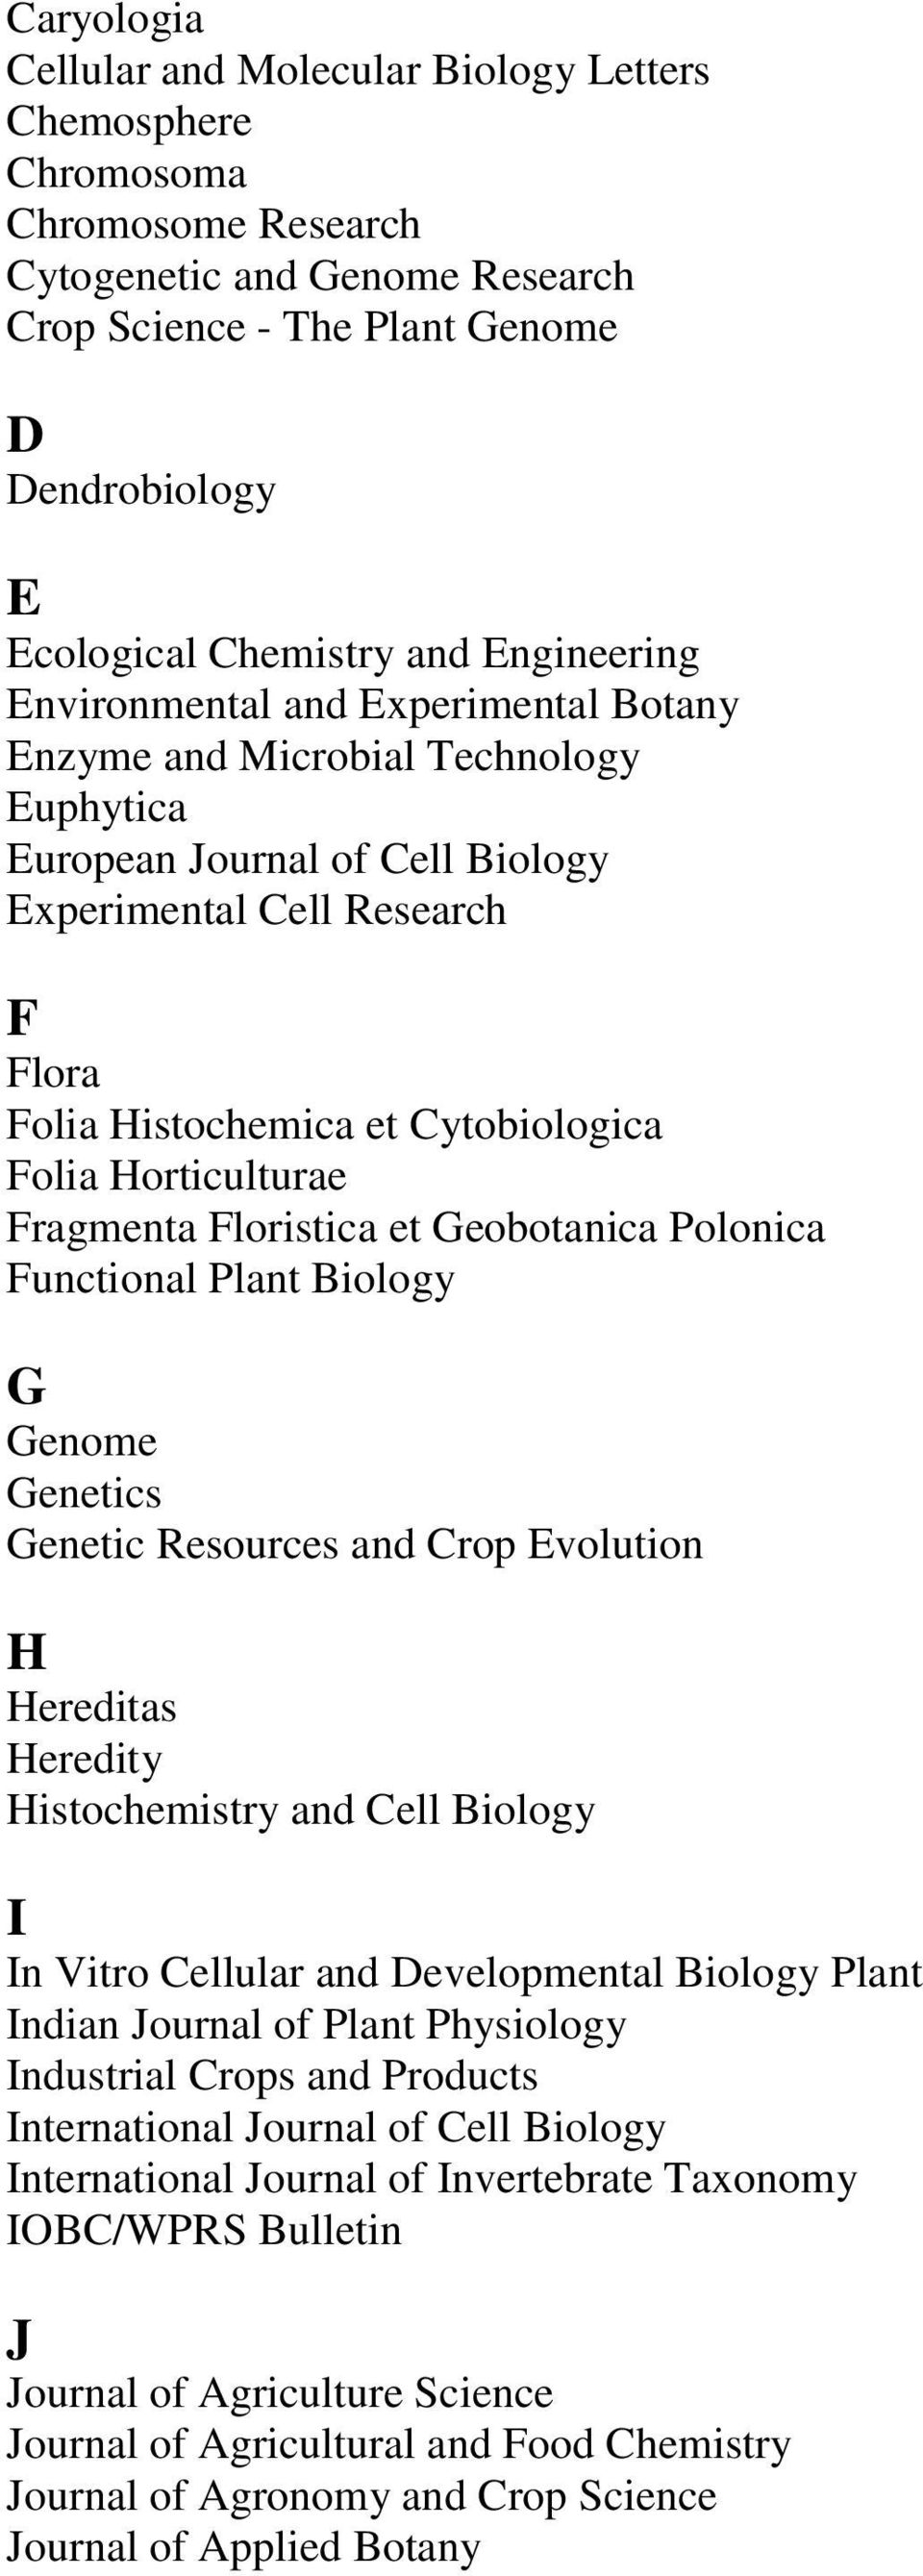 Folia Horticulturae Fragmenta Floristica et Geobotanica Polonica Functional Plant Biology G Genome Genetics Genetic Resources and Crop Evolution H Hereditas Heredity Histochemistry and Cell Biology I